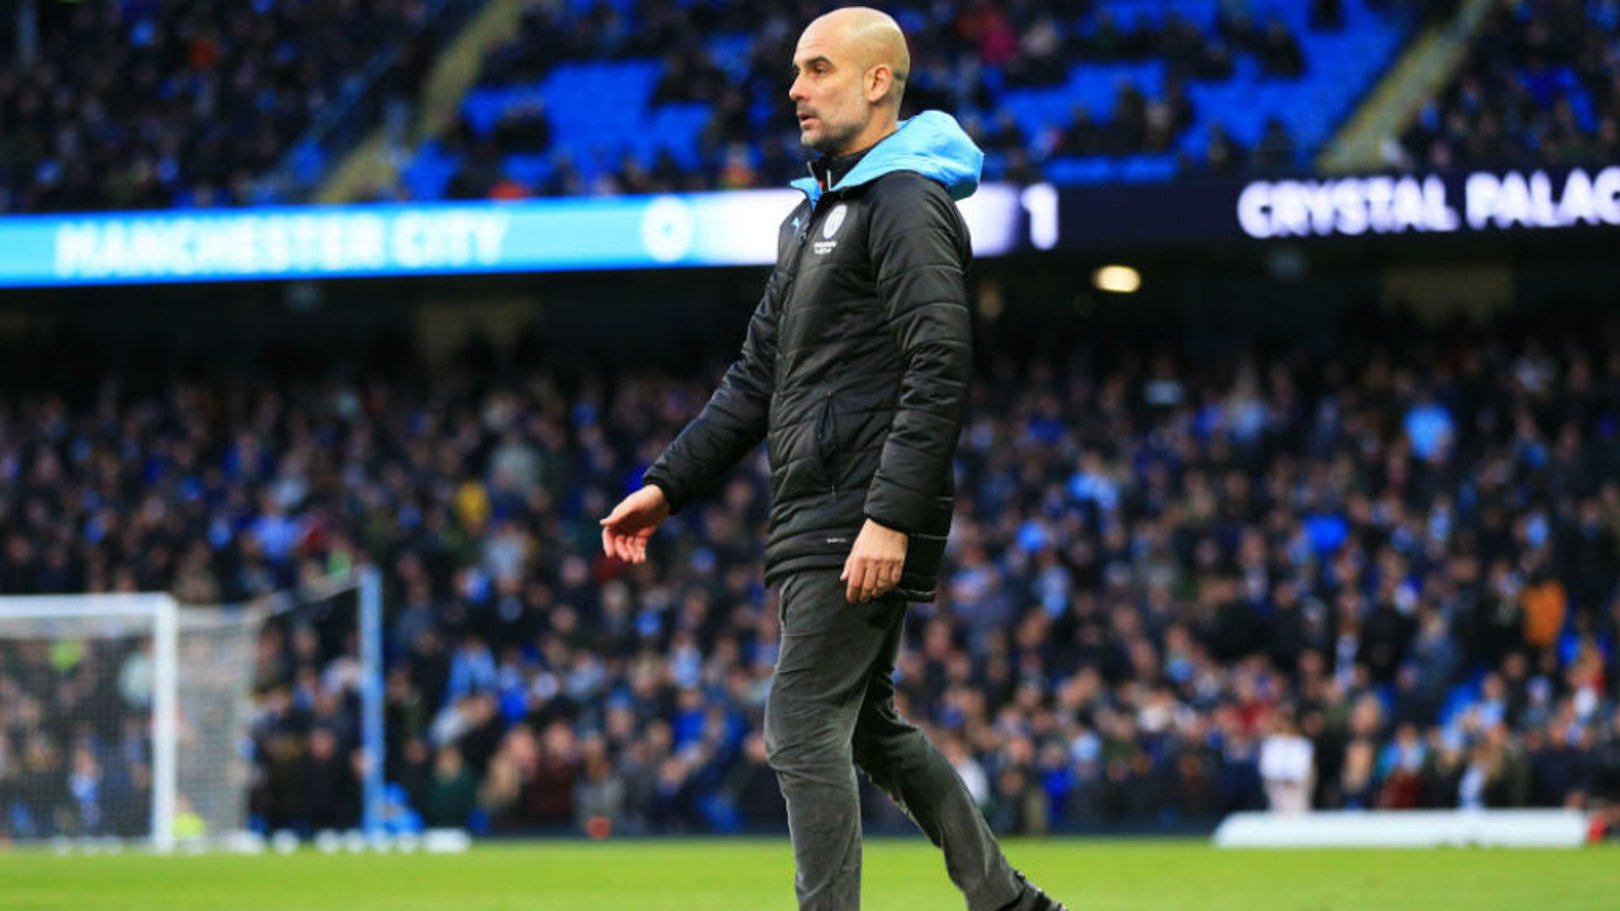 THE BOSS: Guardiola watches on from the touchline.